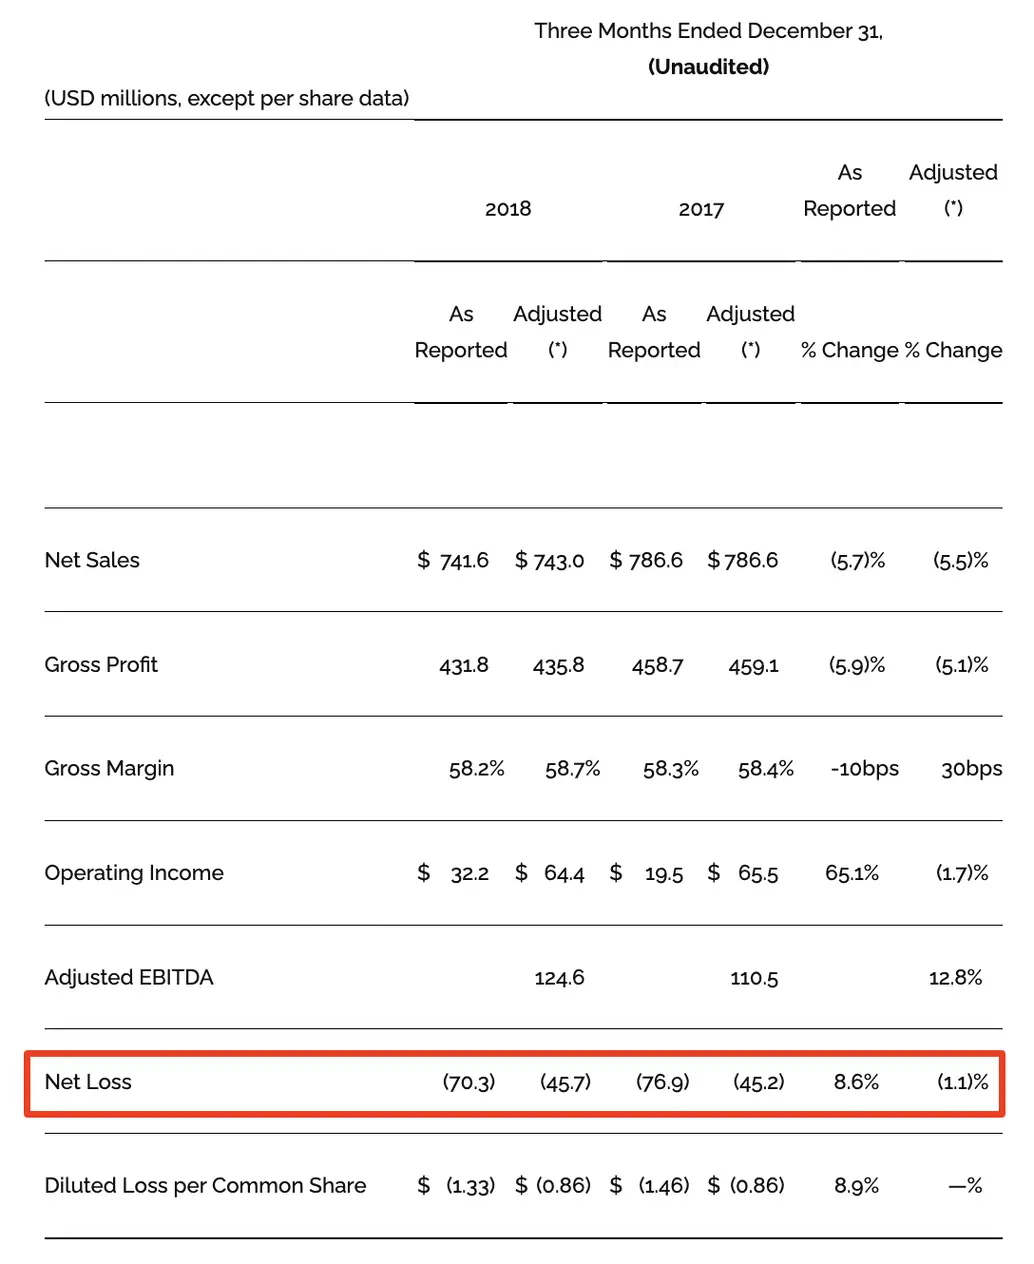 Revlon financial statement from 2017 to 2018